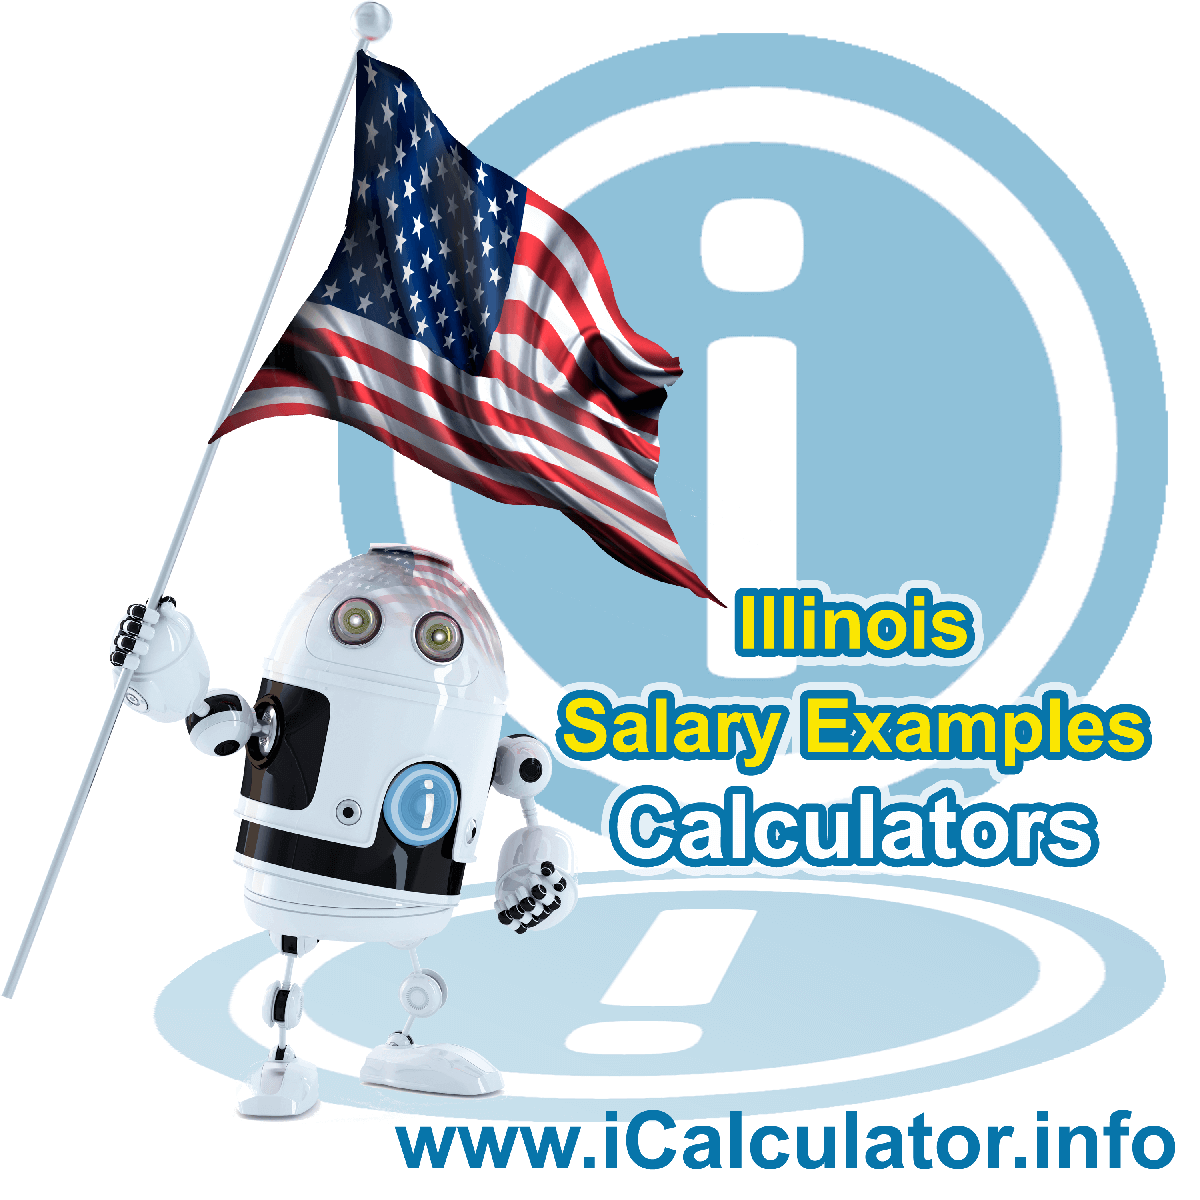 Illinois Salary Example for $ 260,000.00 in 2023 | iCalculator™ | $ 260,000.00 salary example for employee and employer paying Illinois State tincome taxes. Detailed salary after tax calculation including Illinois State Tax, Federal State Tax, Medicare Deductions, Social Security, Capital Gains and other income tax and salary deductions complete with supporting Illinois state tax tables 